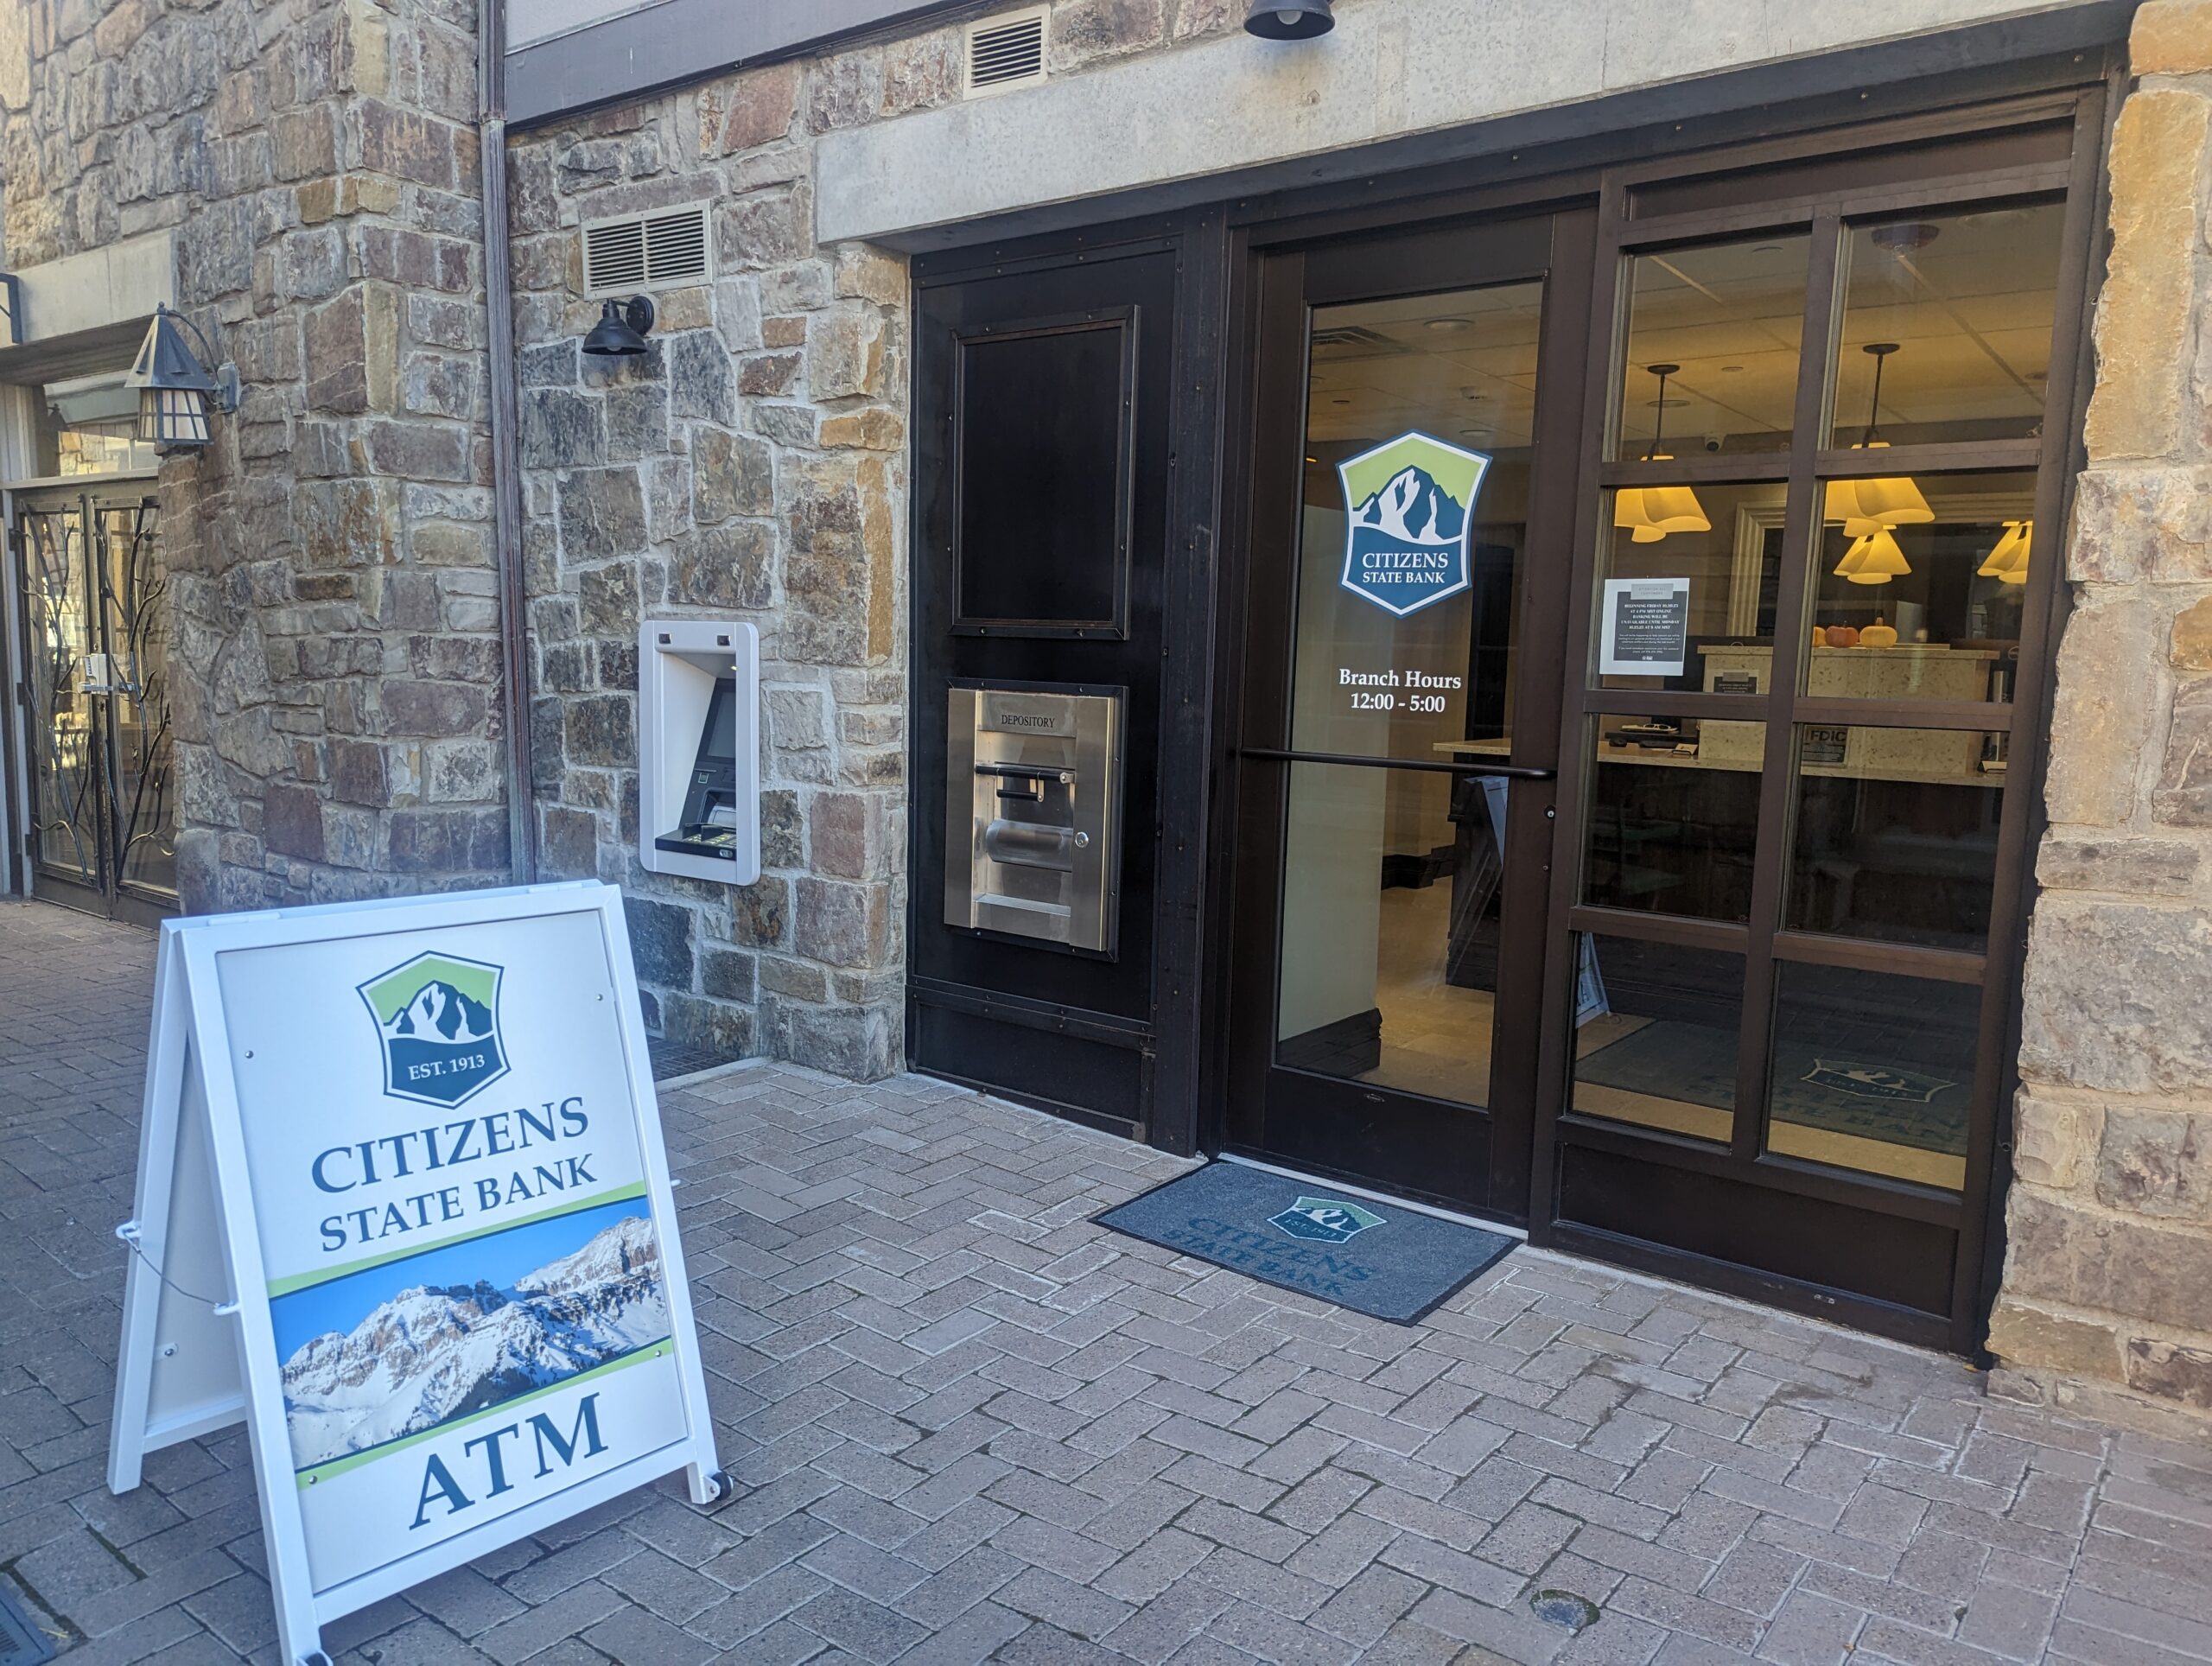 exterior shot of the Citizens State Bank Mt. Village location